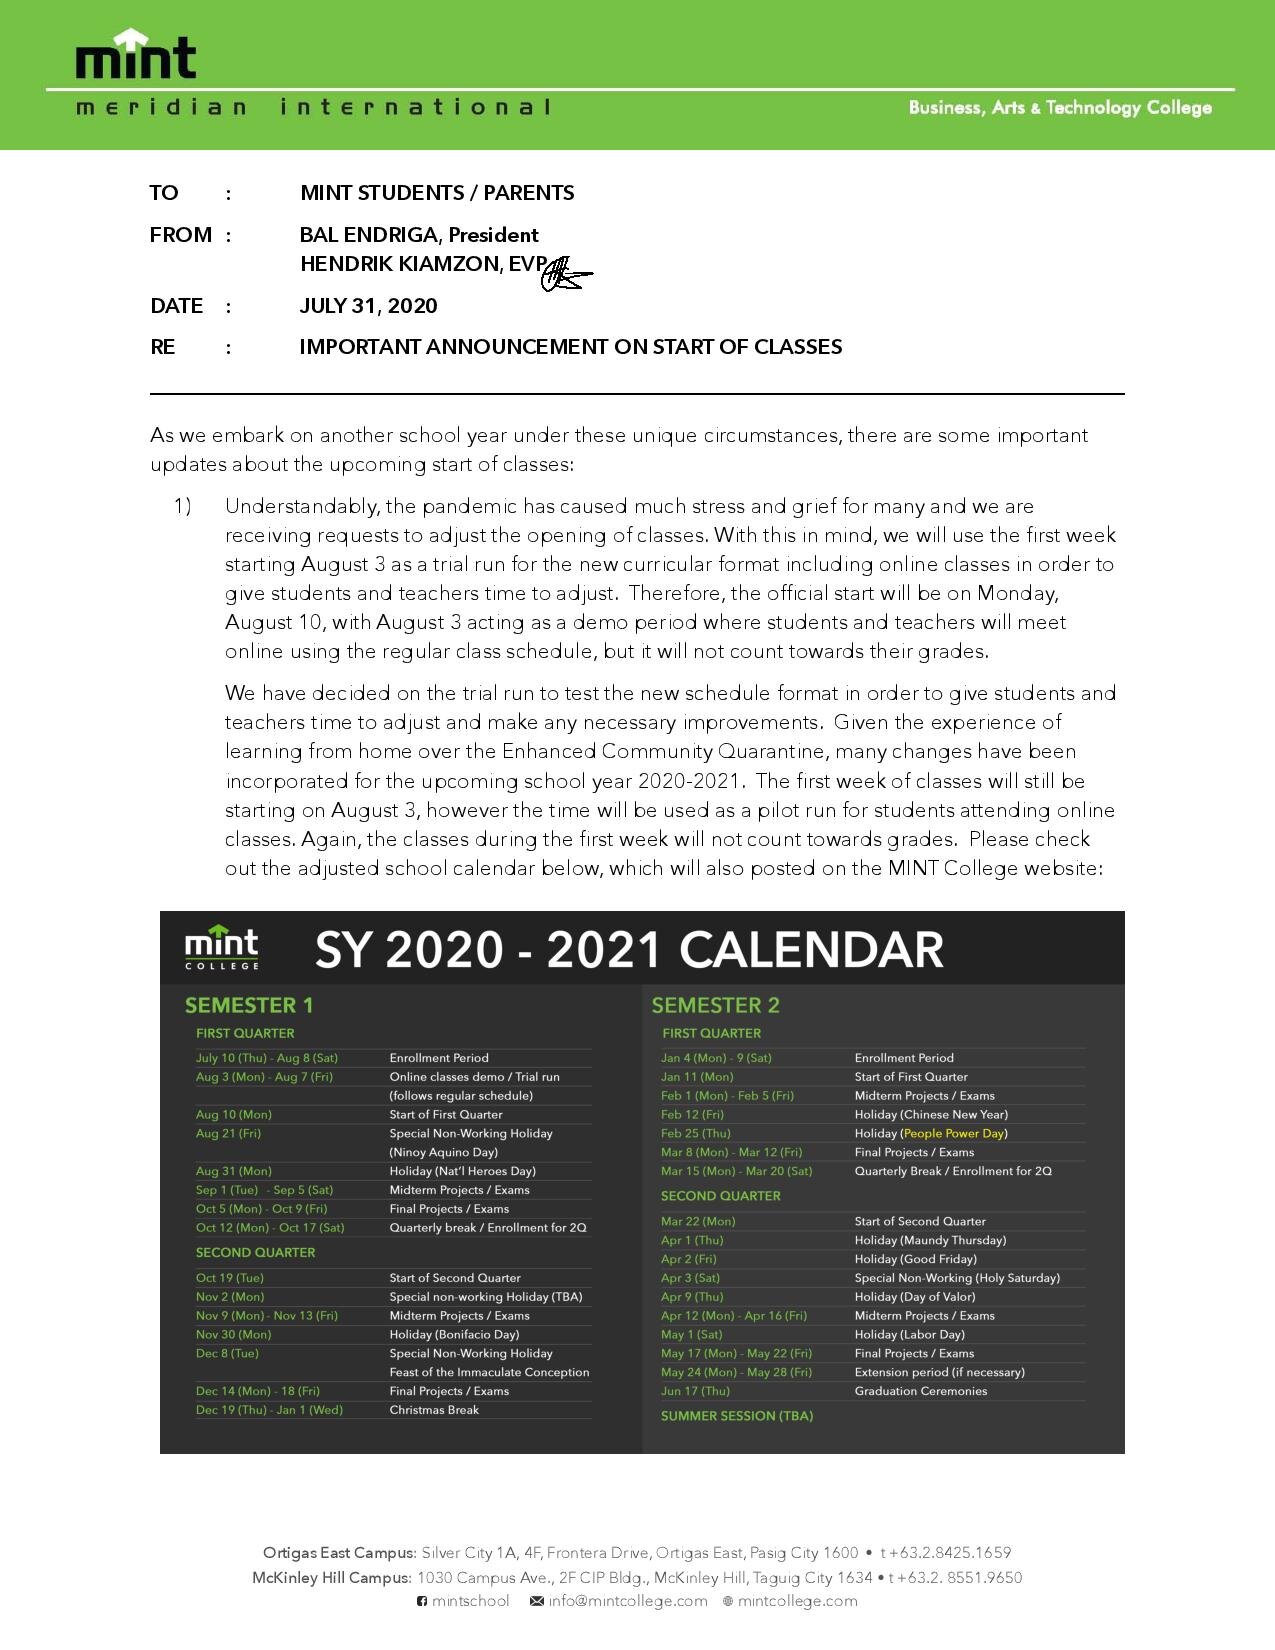 073120 Important Announcement-page-001.jpg